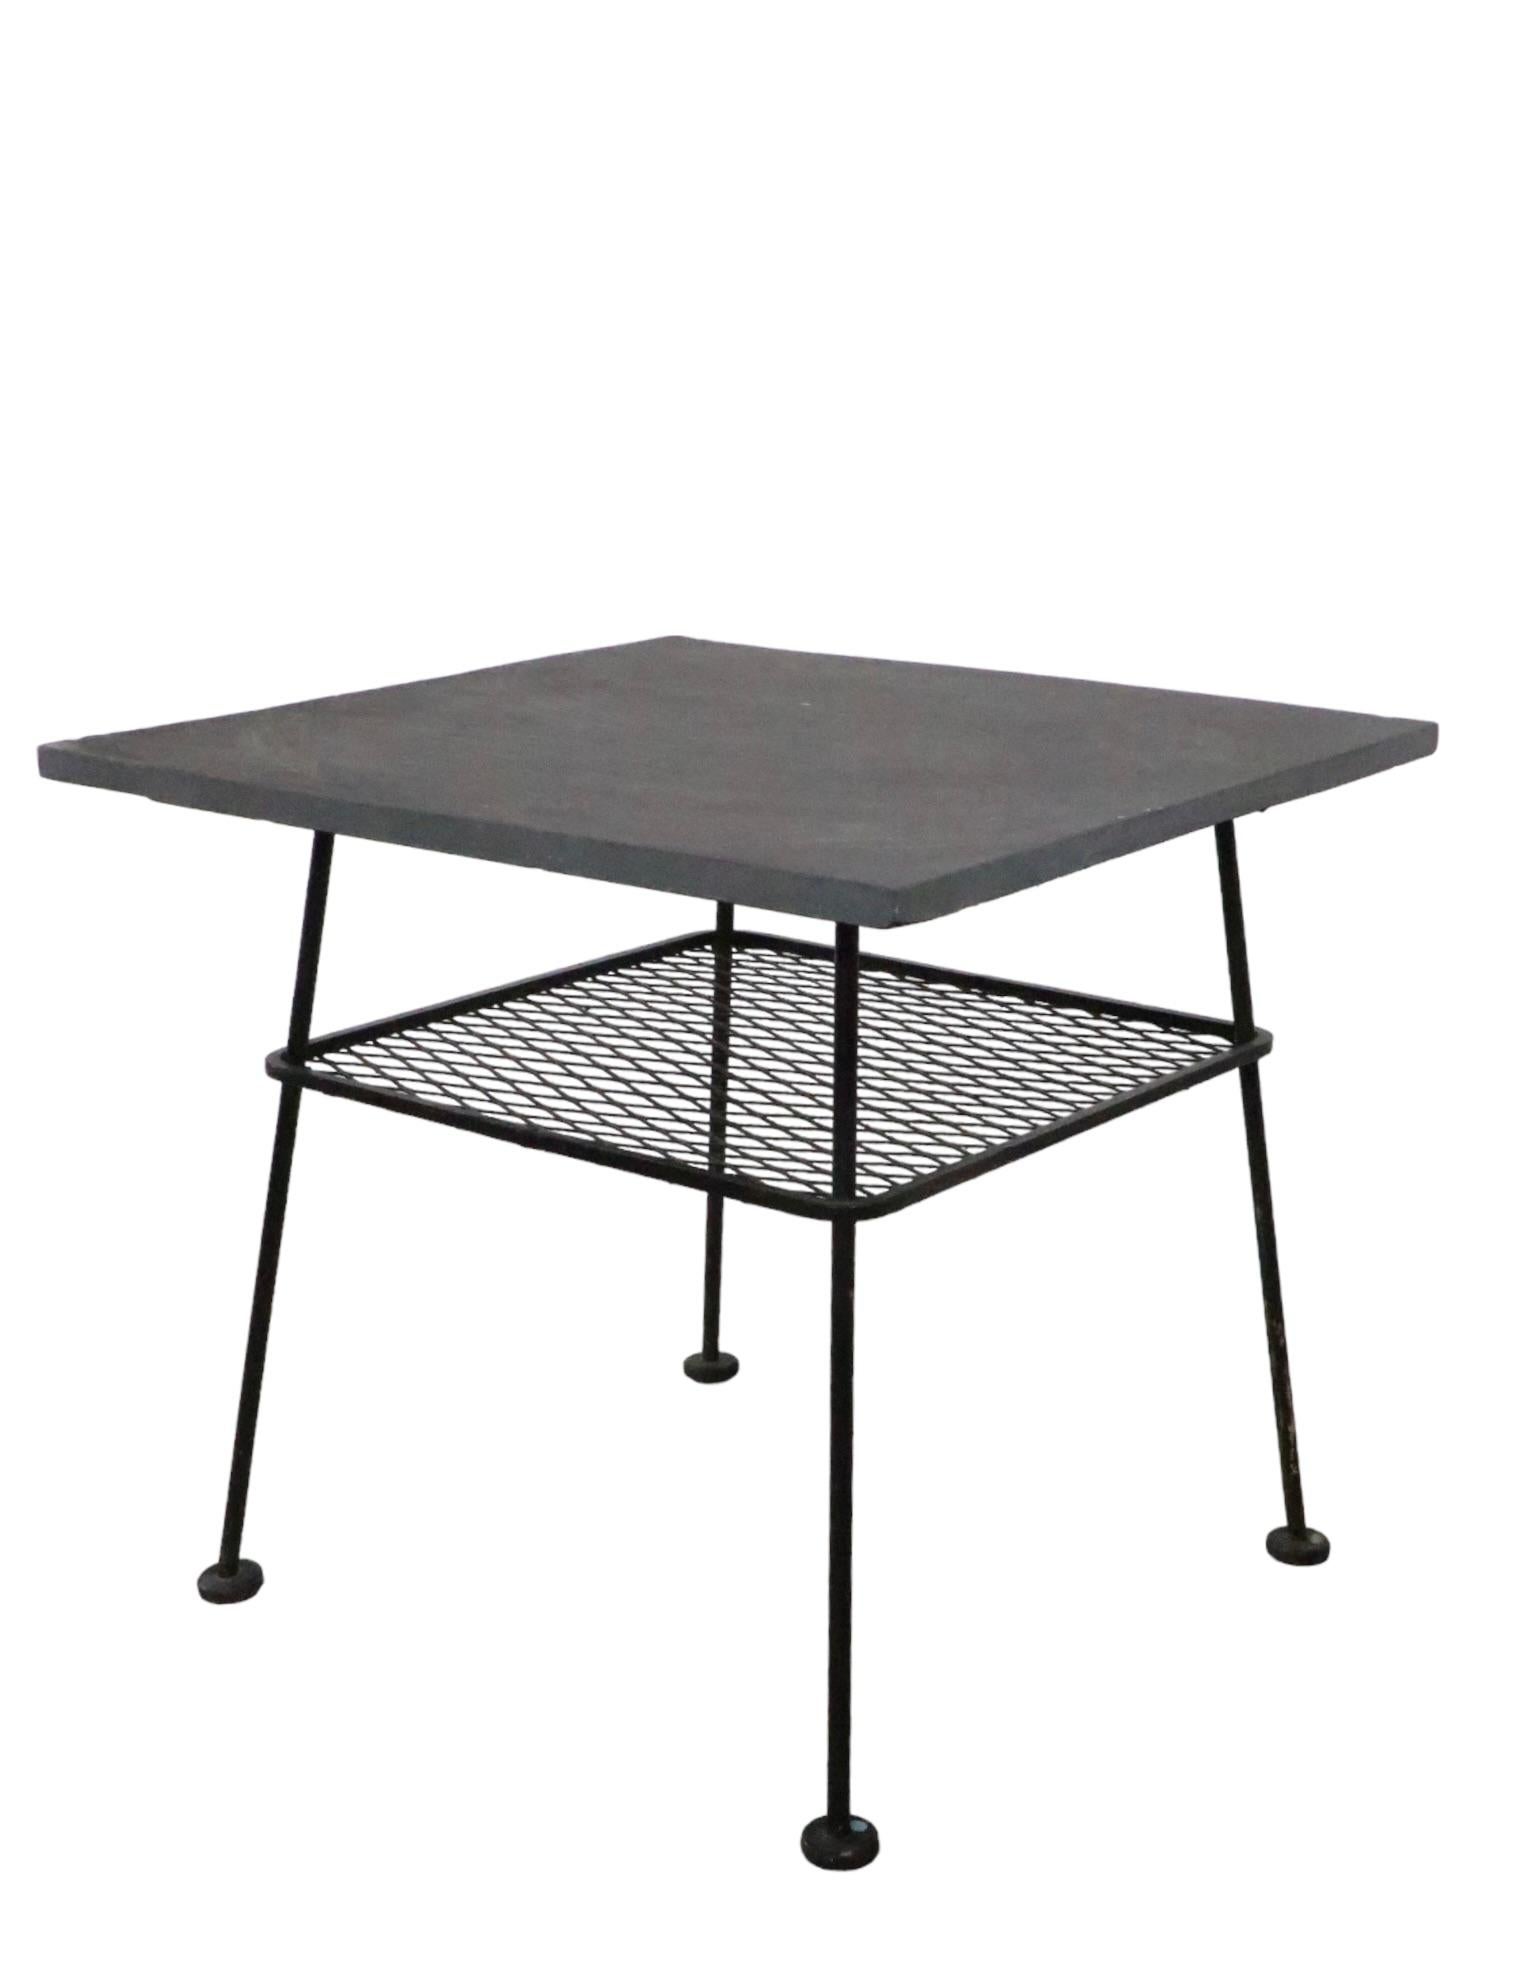 Mid-Century Modern Wrought Iron and Slate Garden Patio, Sunroom Table After McCobb, Woodard, 1950s For Sale